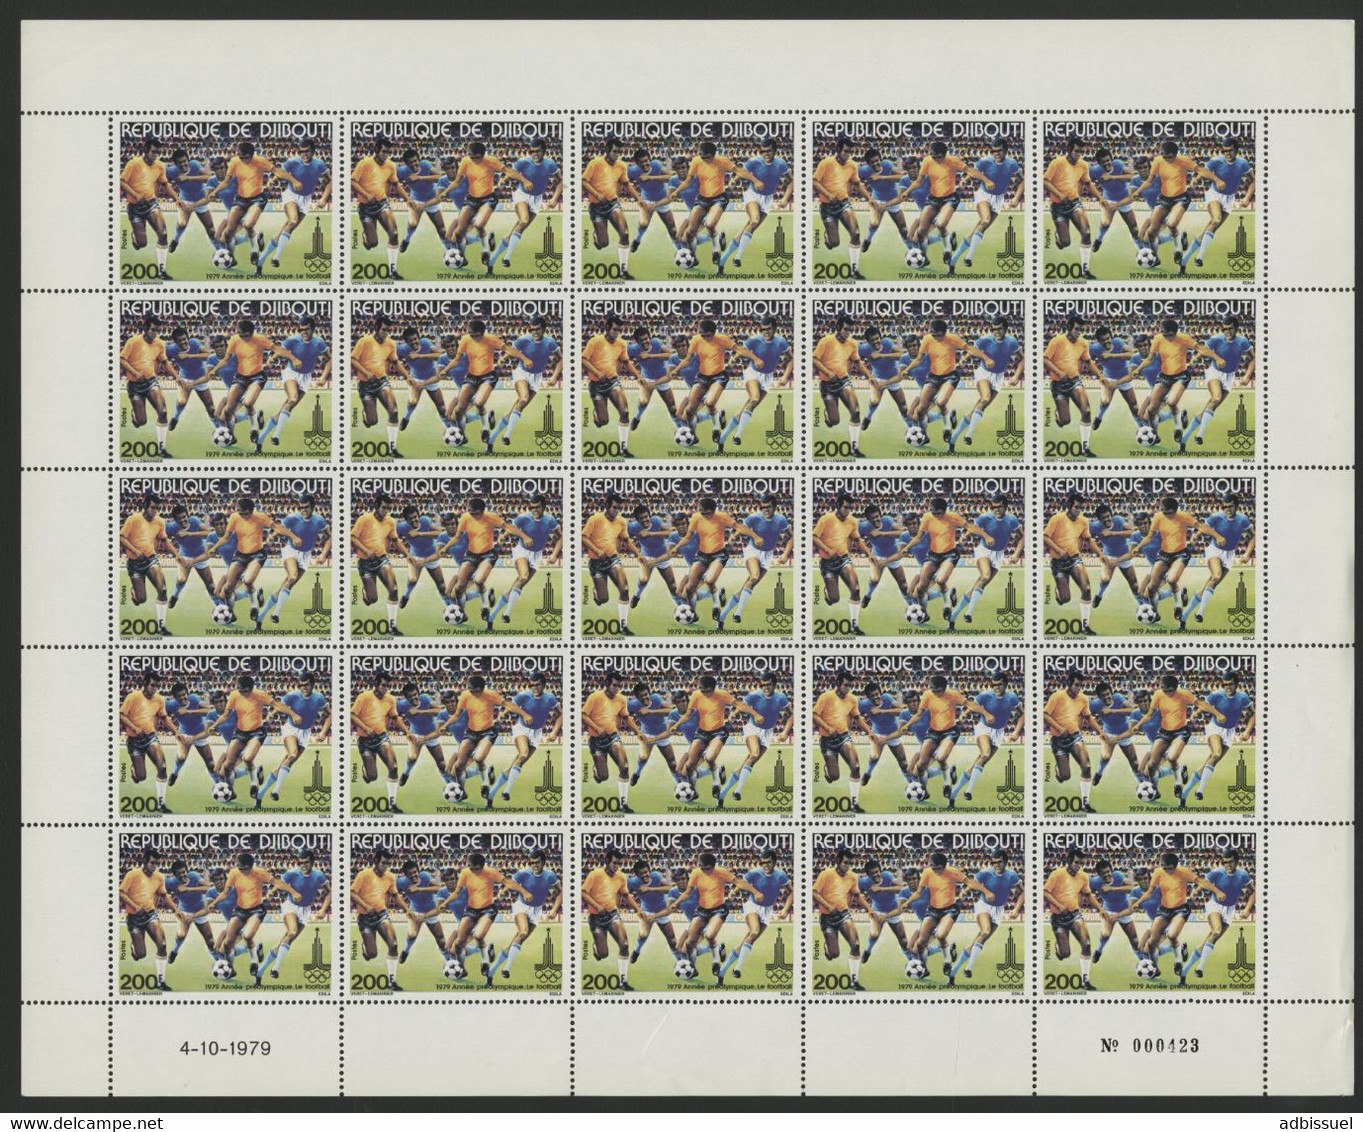 DJIBOUTI N° 511 COTE 106,25 € FEUILLE De 25 Ex. MNH ** ANNEE PREOLYMPIQUE OLYMPIC FOOTBALL SOCCER - Summer 1980: Moscow